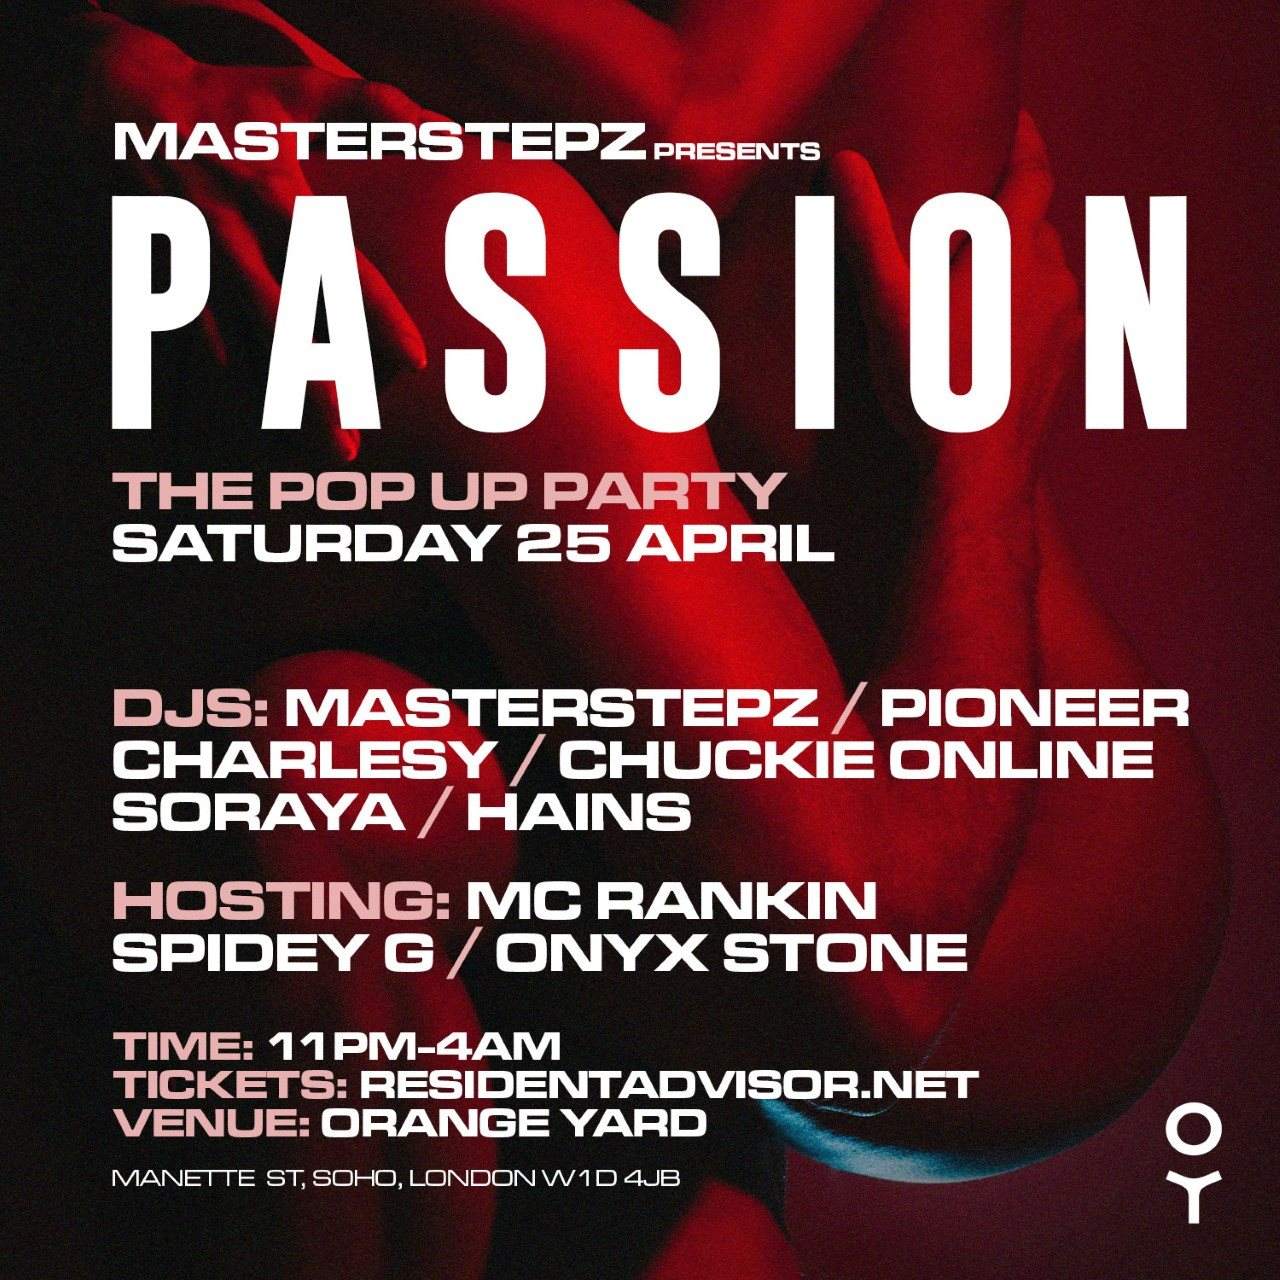 Masterstepz presents 'Passion - The Pop Up Party' - Página frontal